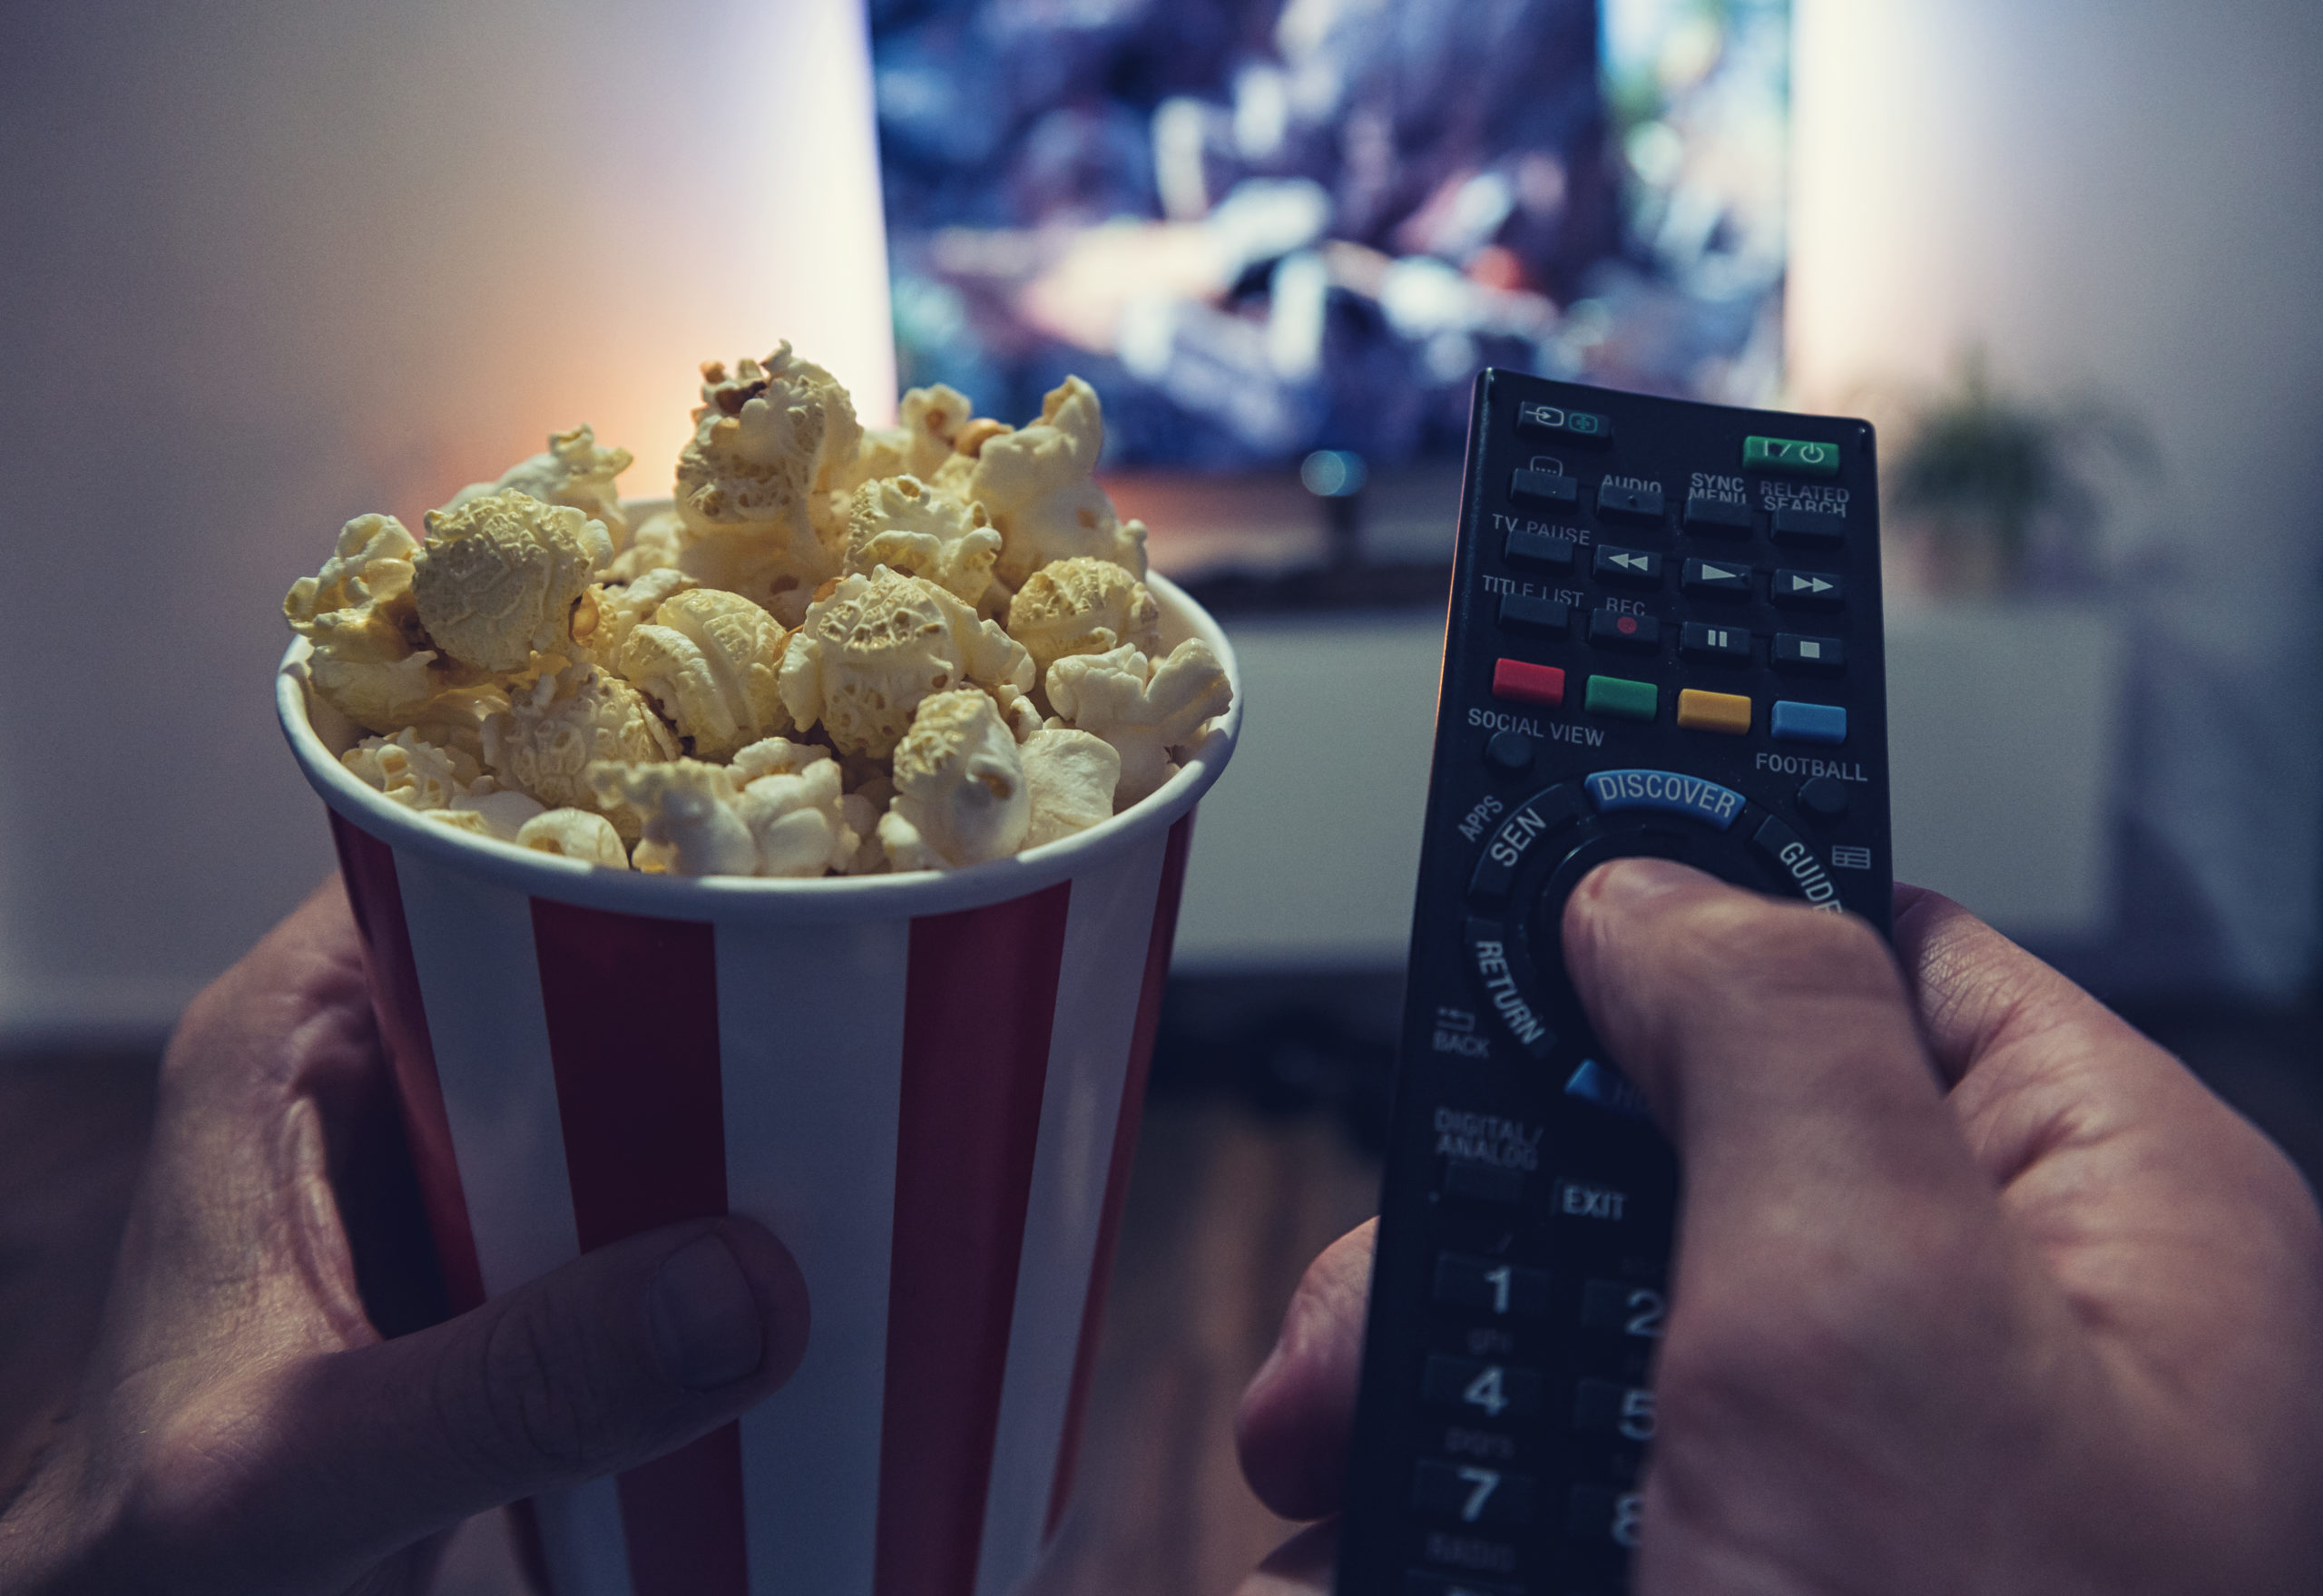 A man watches a movie at home with popcorn